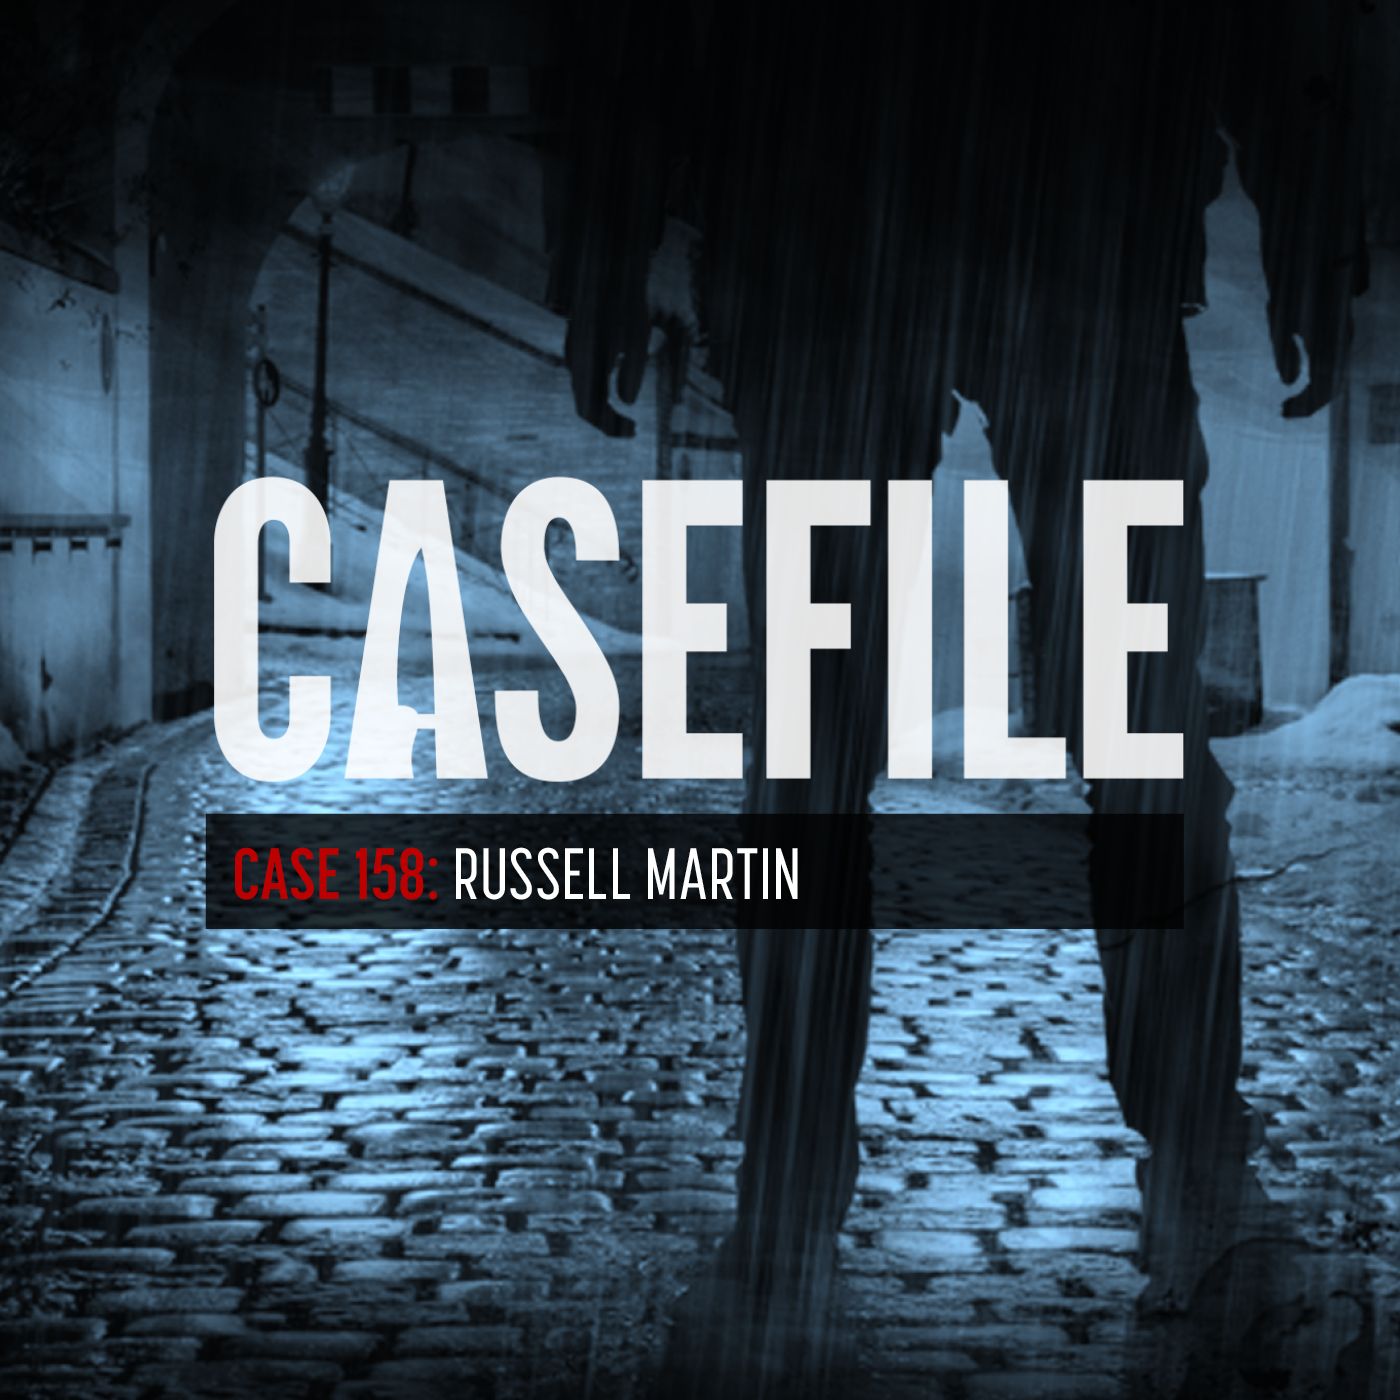 Case 158: Russell Martin